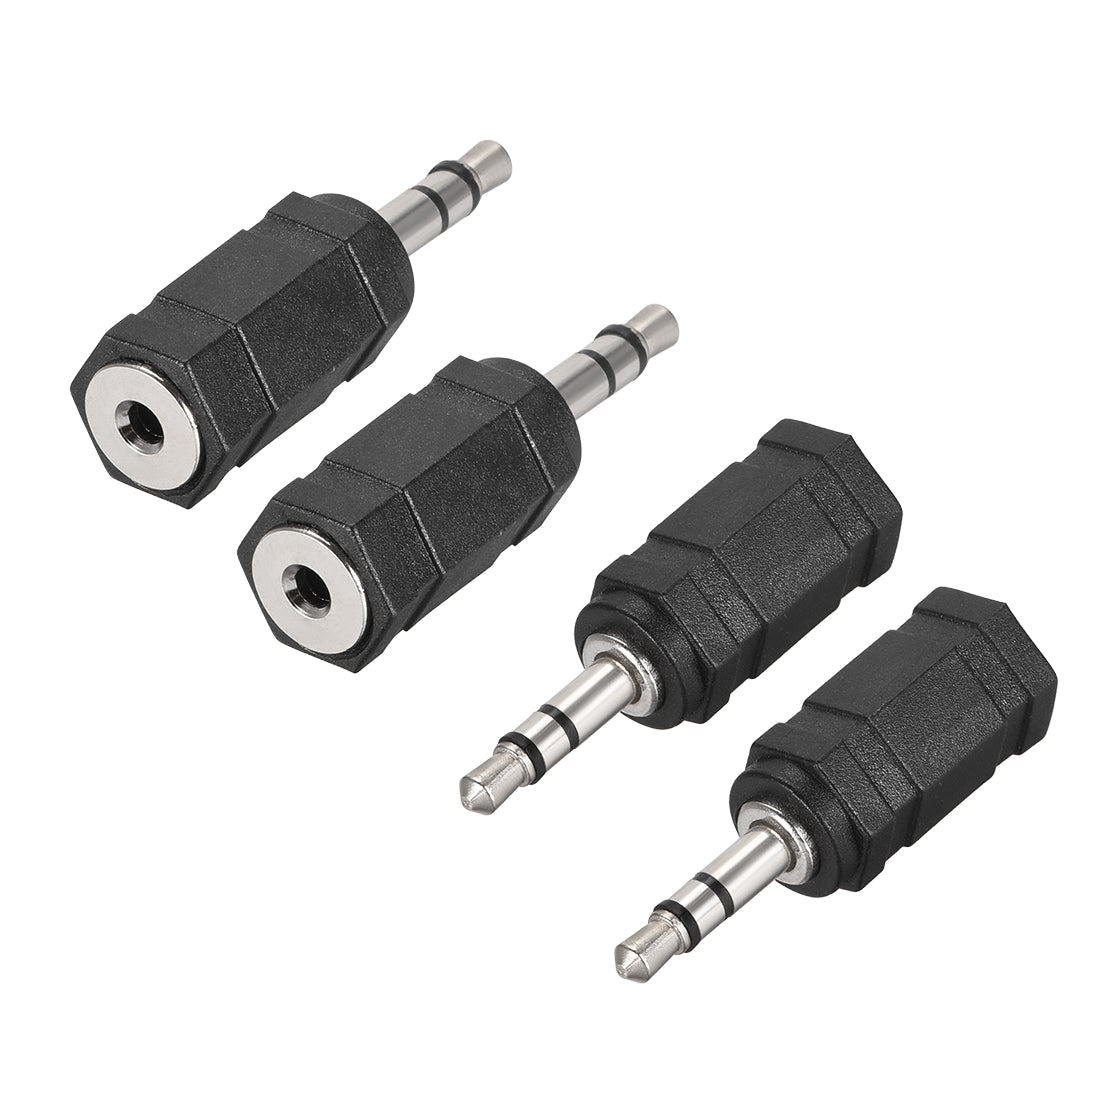 uxcell Uxcell 3.5mm Male to 2.5mm Female Connector Adapter Coupler for Stereo Audio Video AV TV Cable Convert 4Pcs